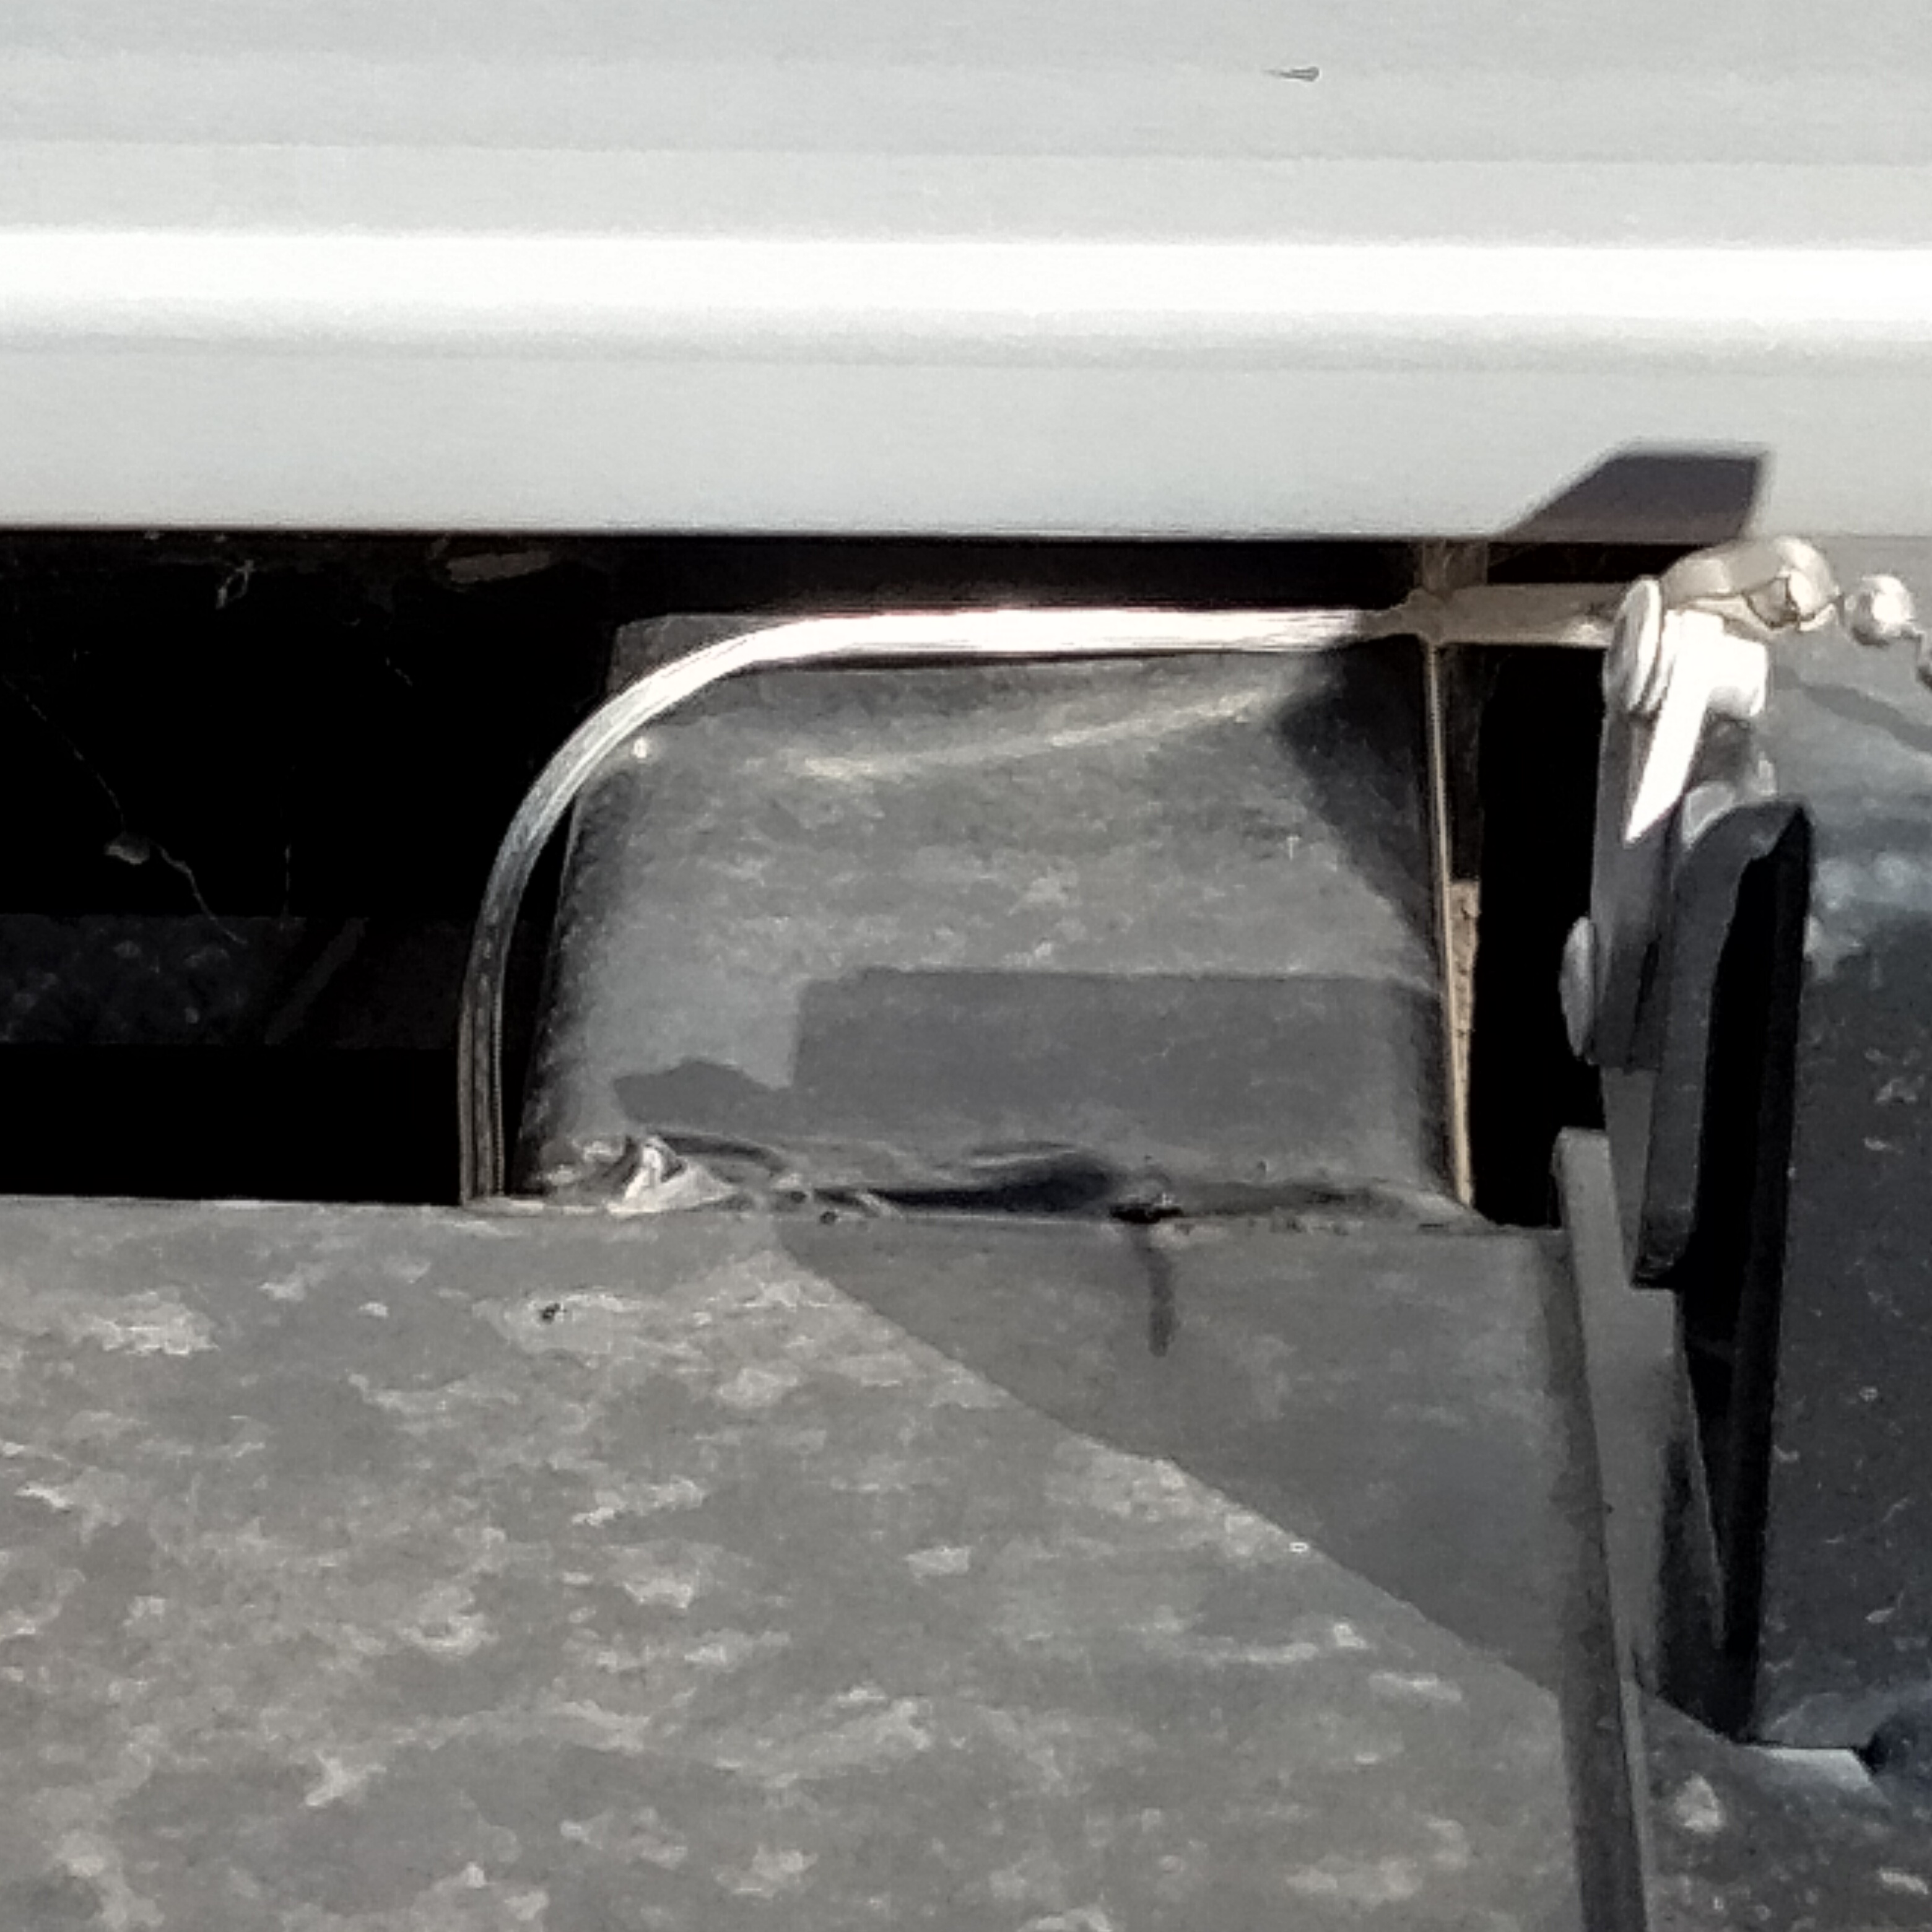 Right hand side of back RV bumper